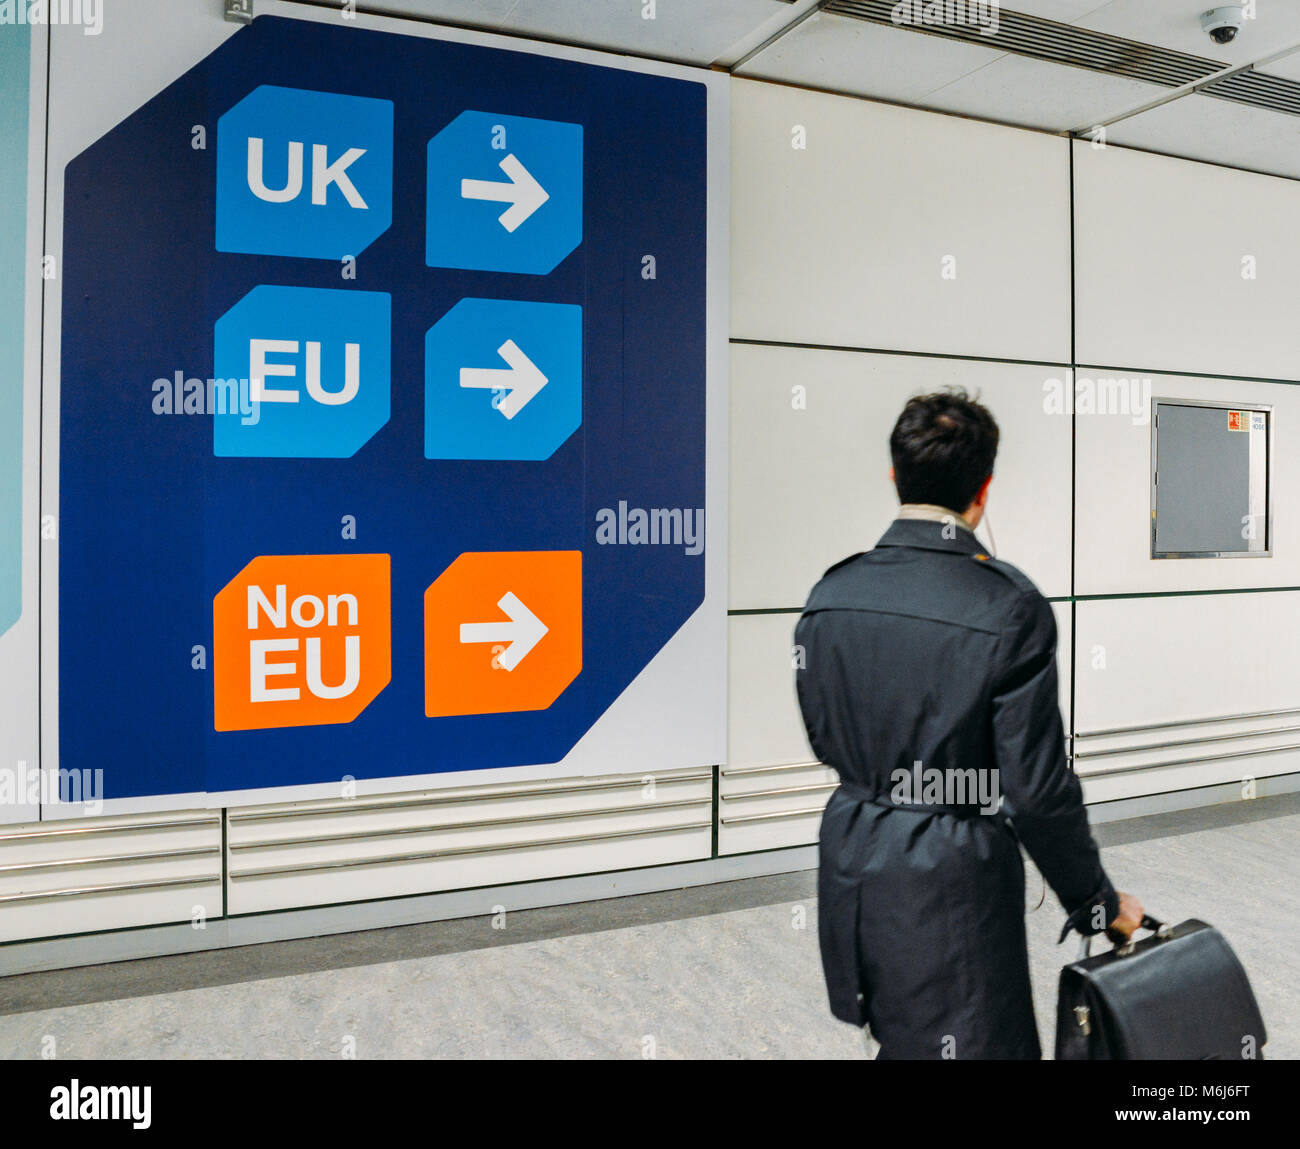 Passenger walks past sign prior to immigration control pass a sign pointing towards queues for UK, EU and Non-EU passport holders. In April 2019, UK is set to leave the European Union - Brexit theme Stock Photo